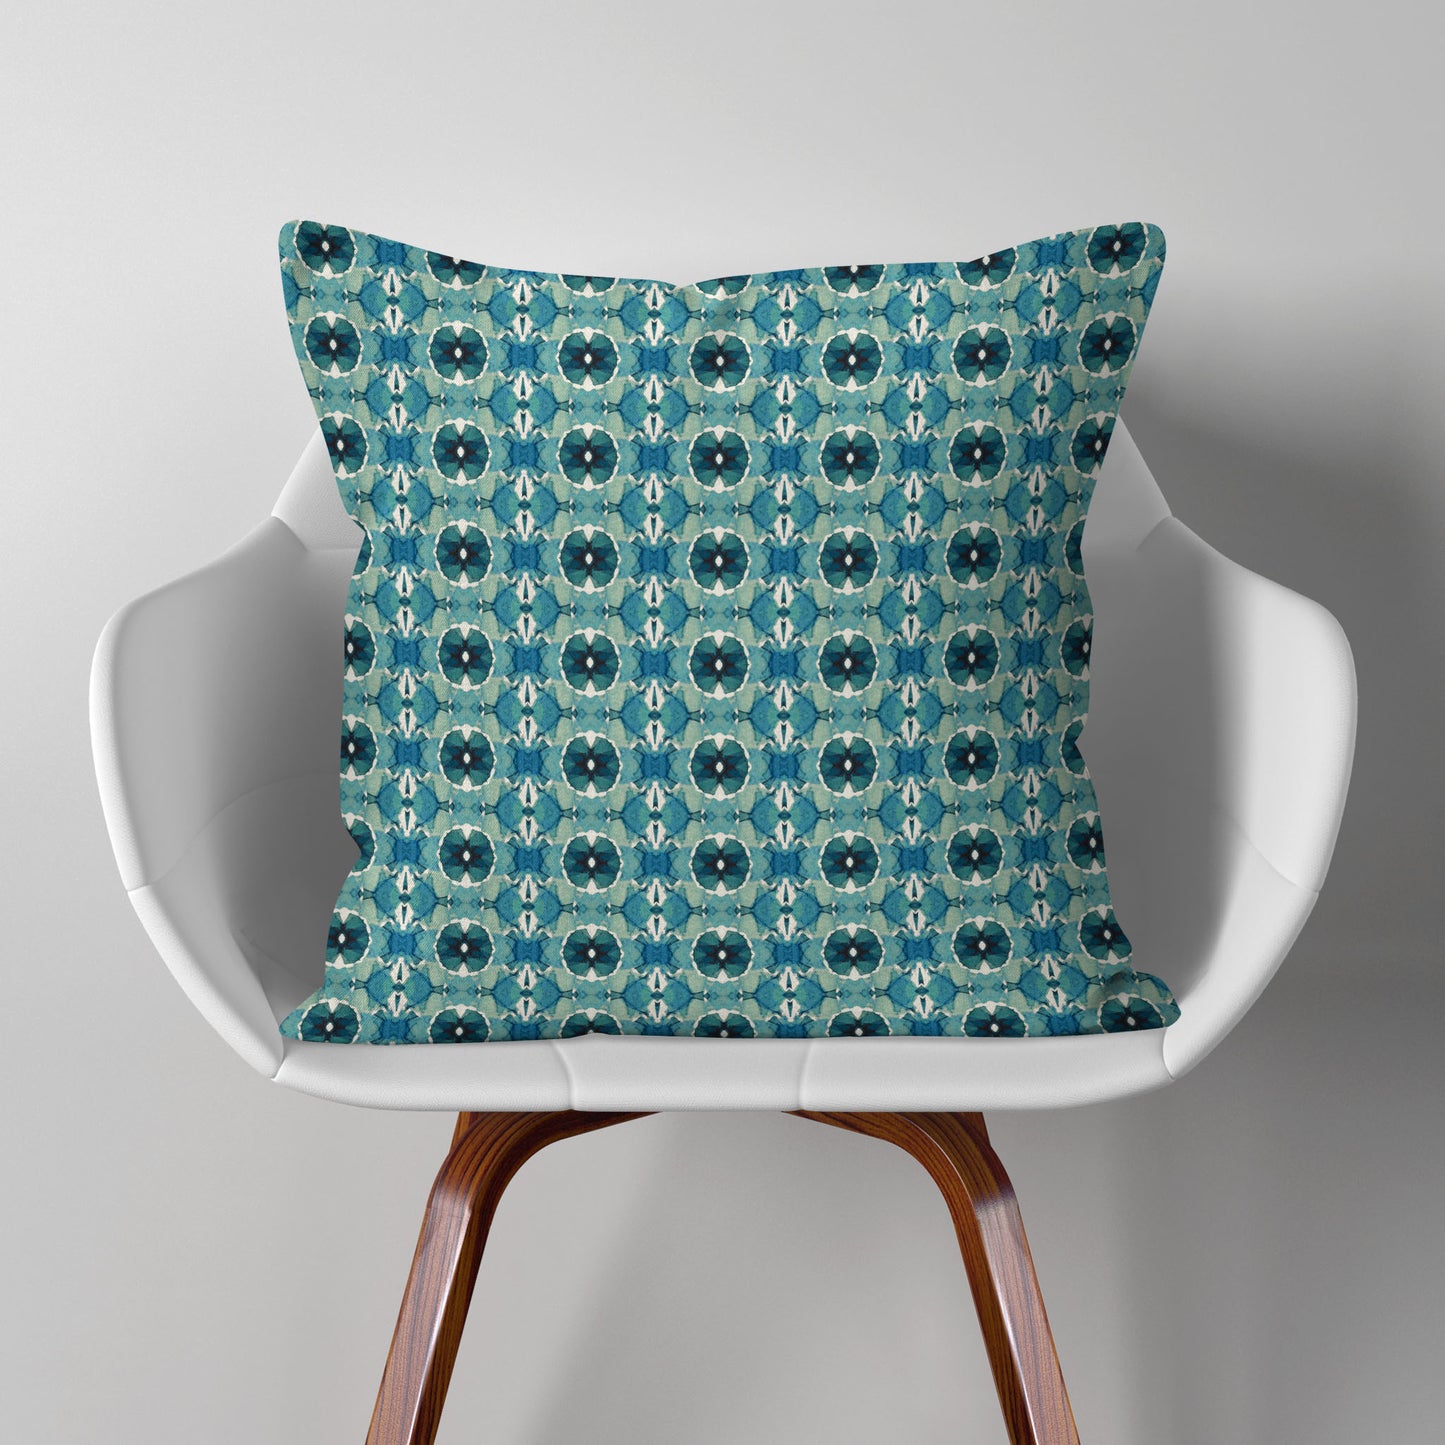 Throw pillow featuring hand-painted geometric pattern in teal, sitting on a modern white chair